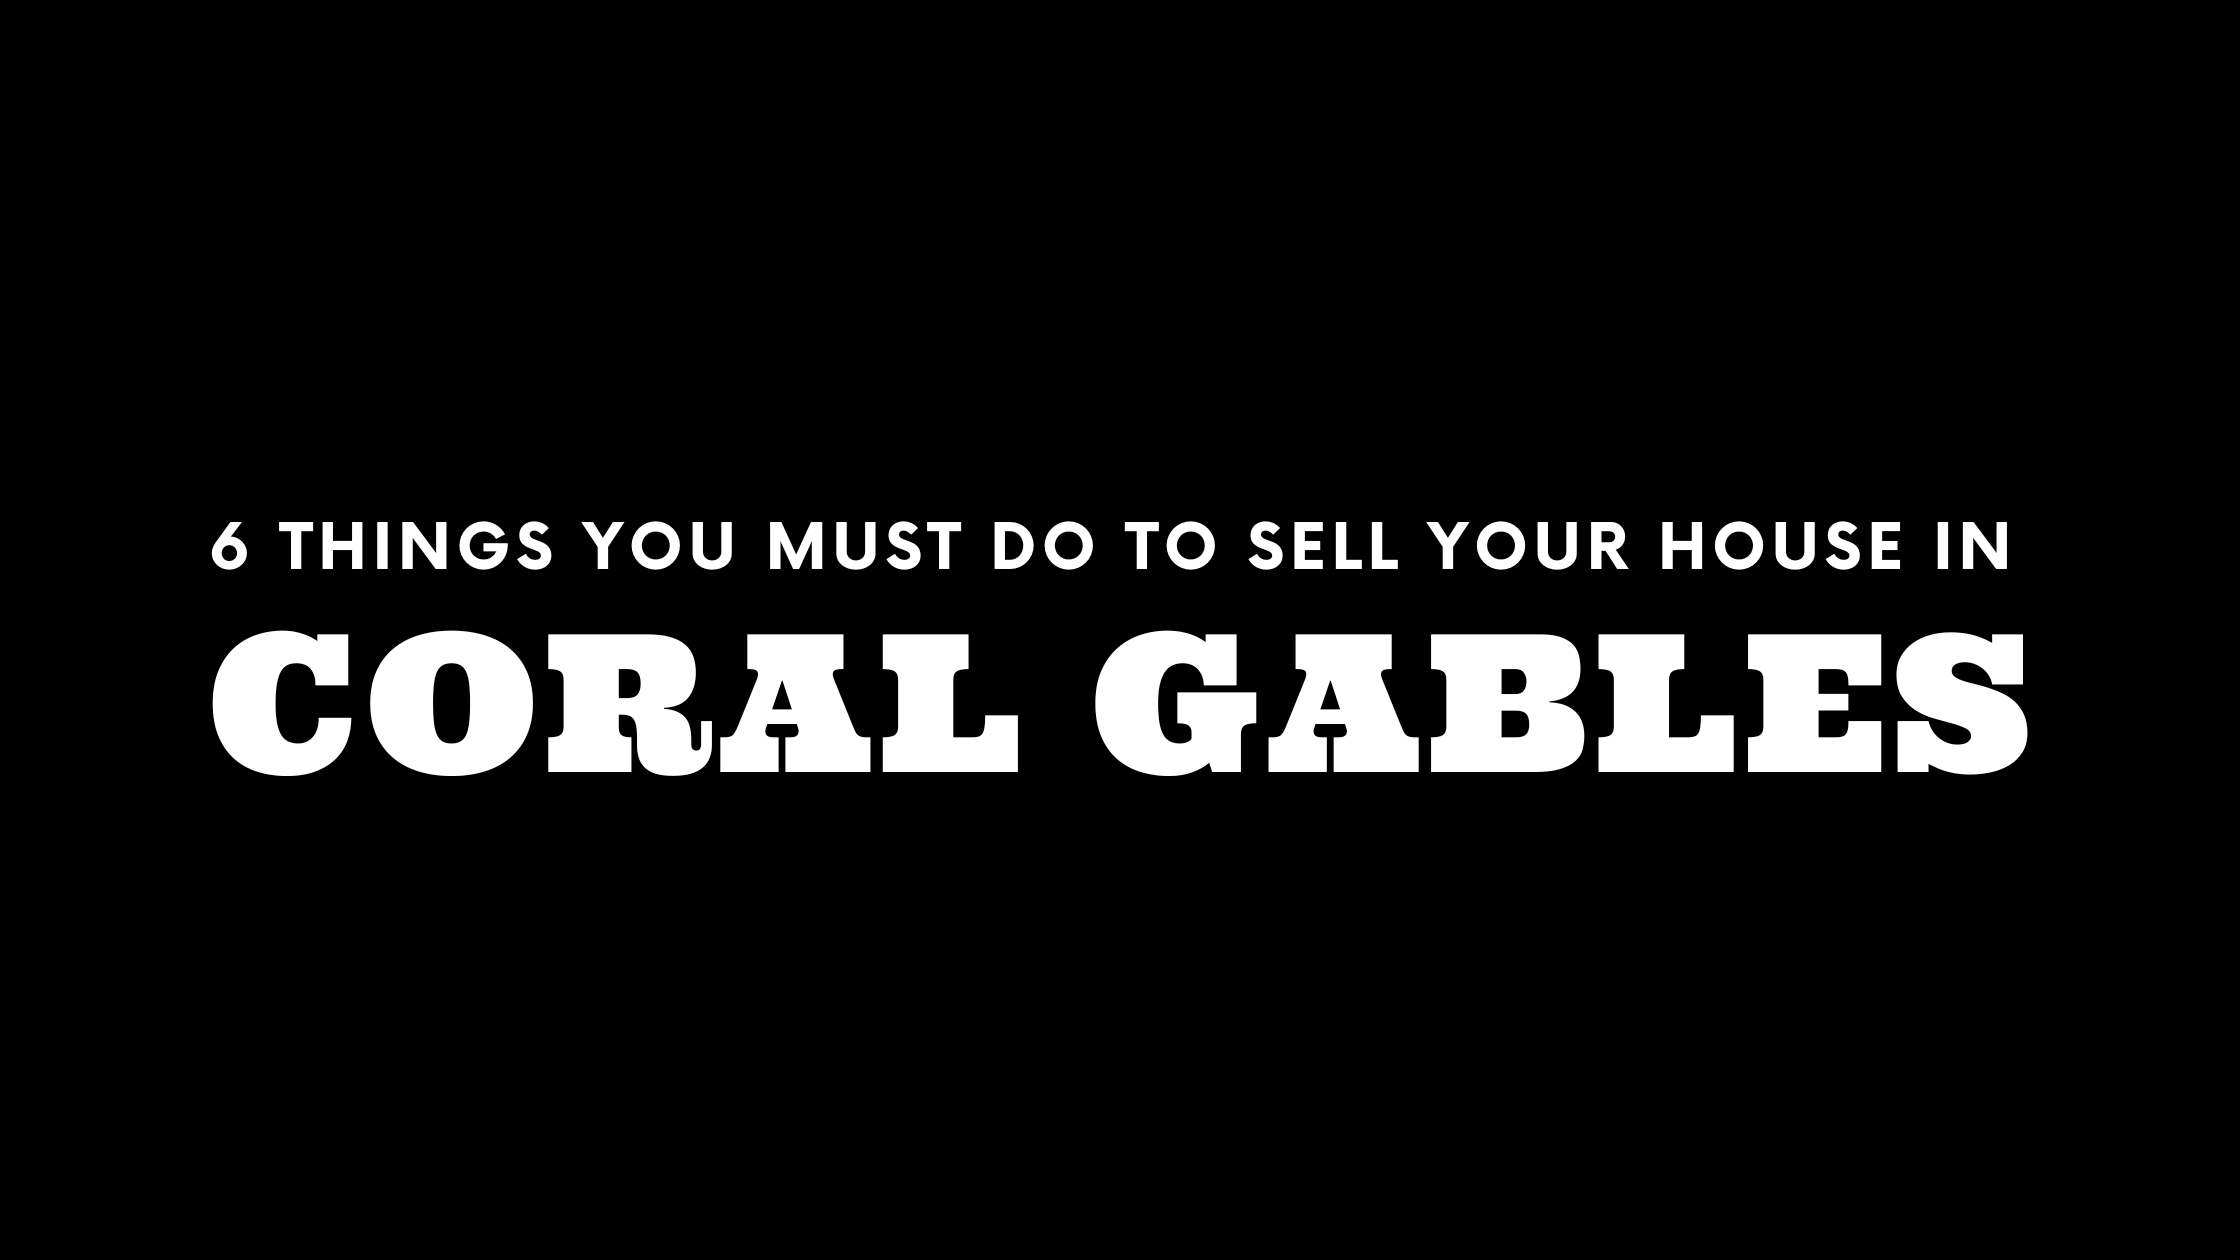 Selling Your House in Coral Gables? 6 Things You MUST Do!